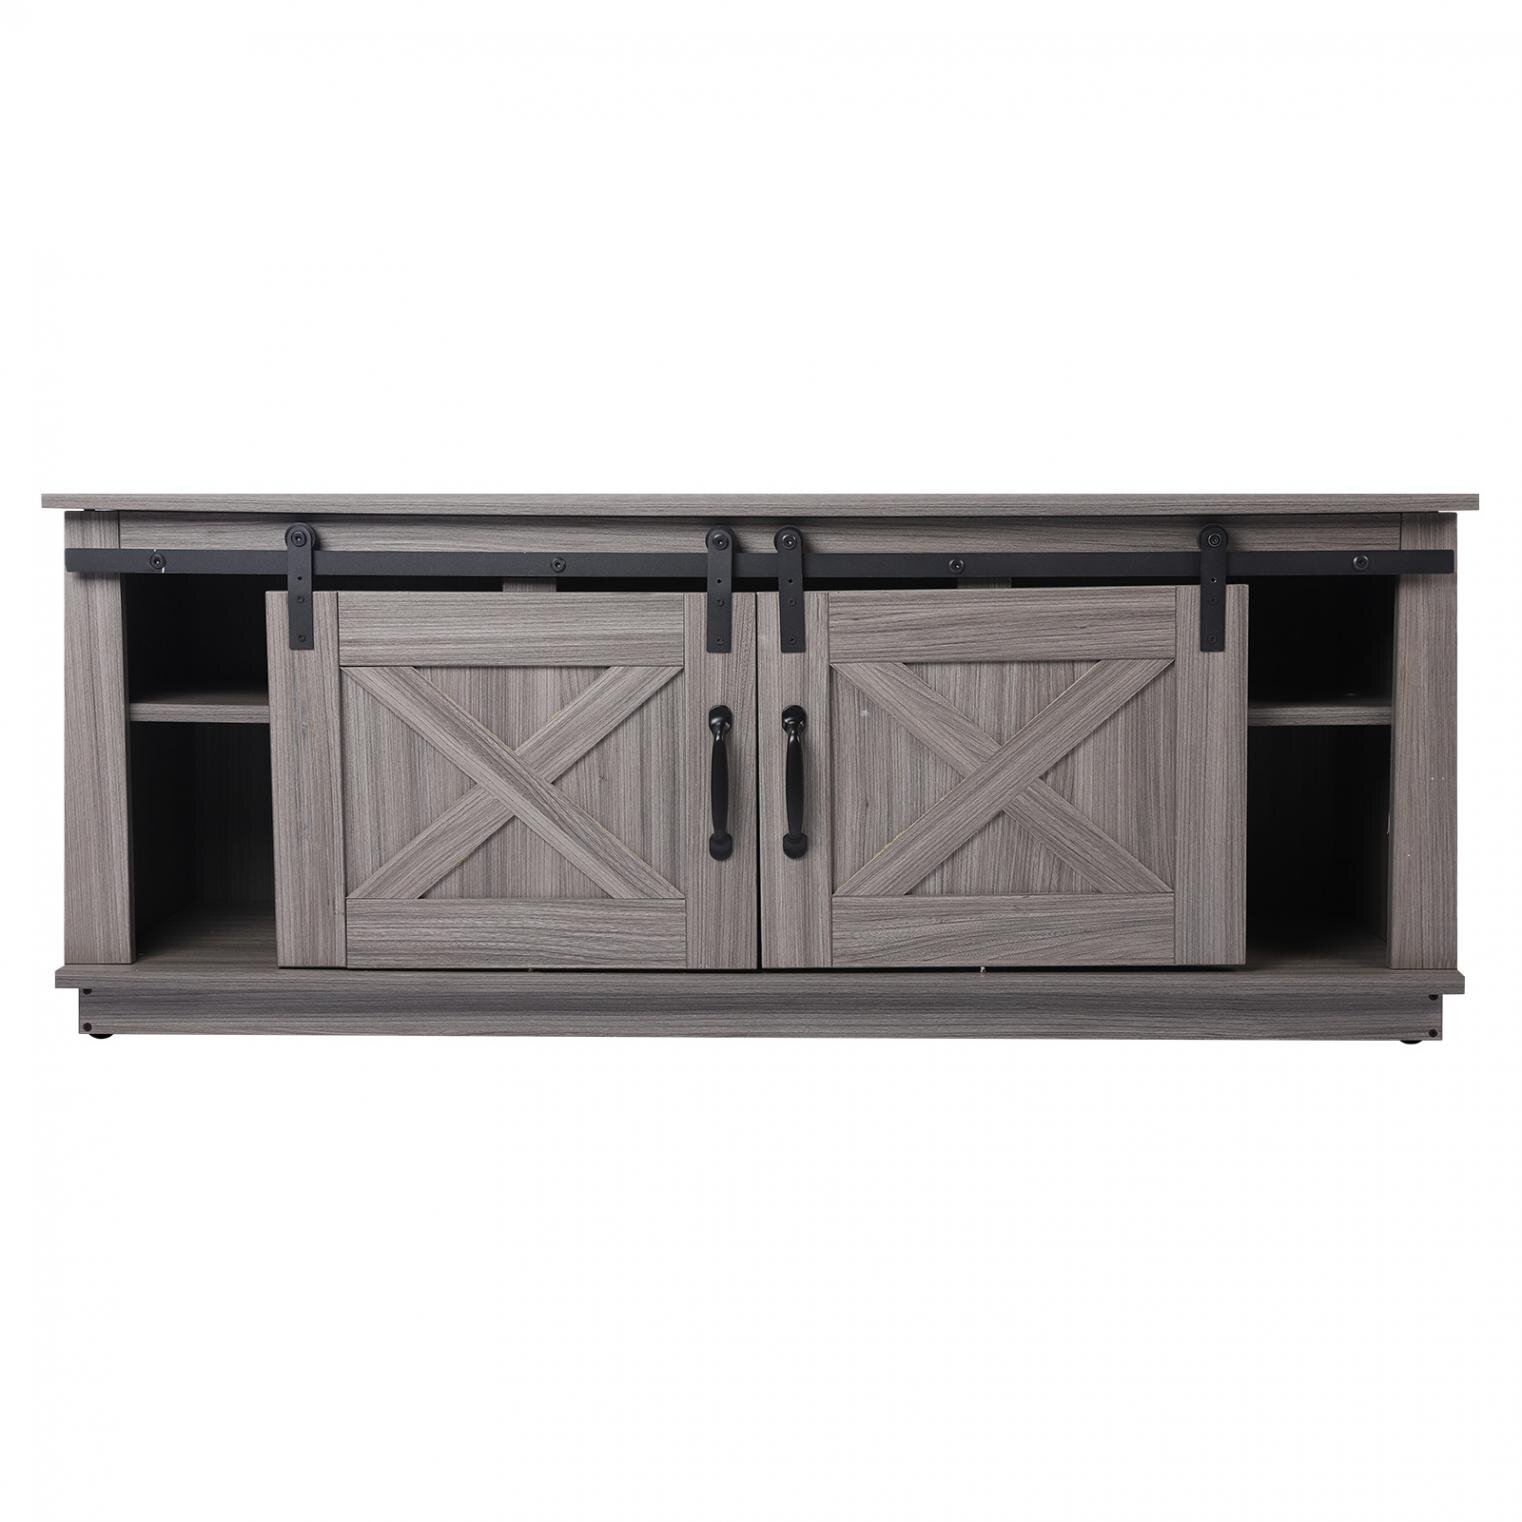 Details about   TV Stand for 46 inch Entertainment Center Media Storage Shelf Modern Home Table 